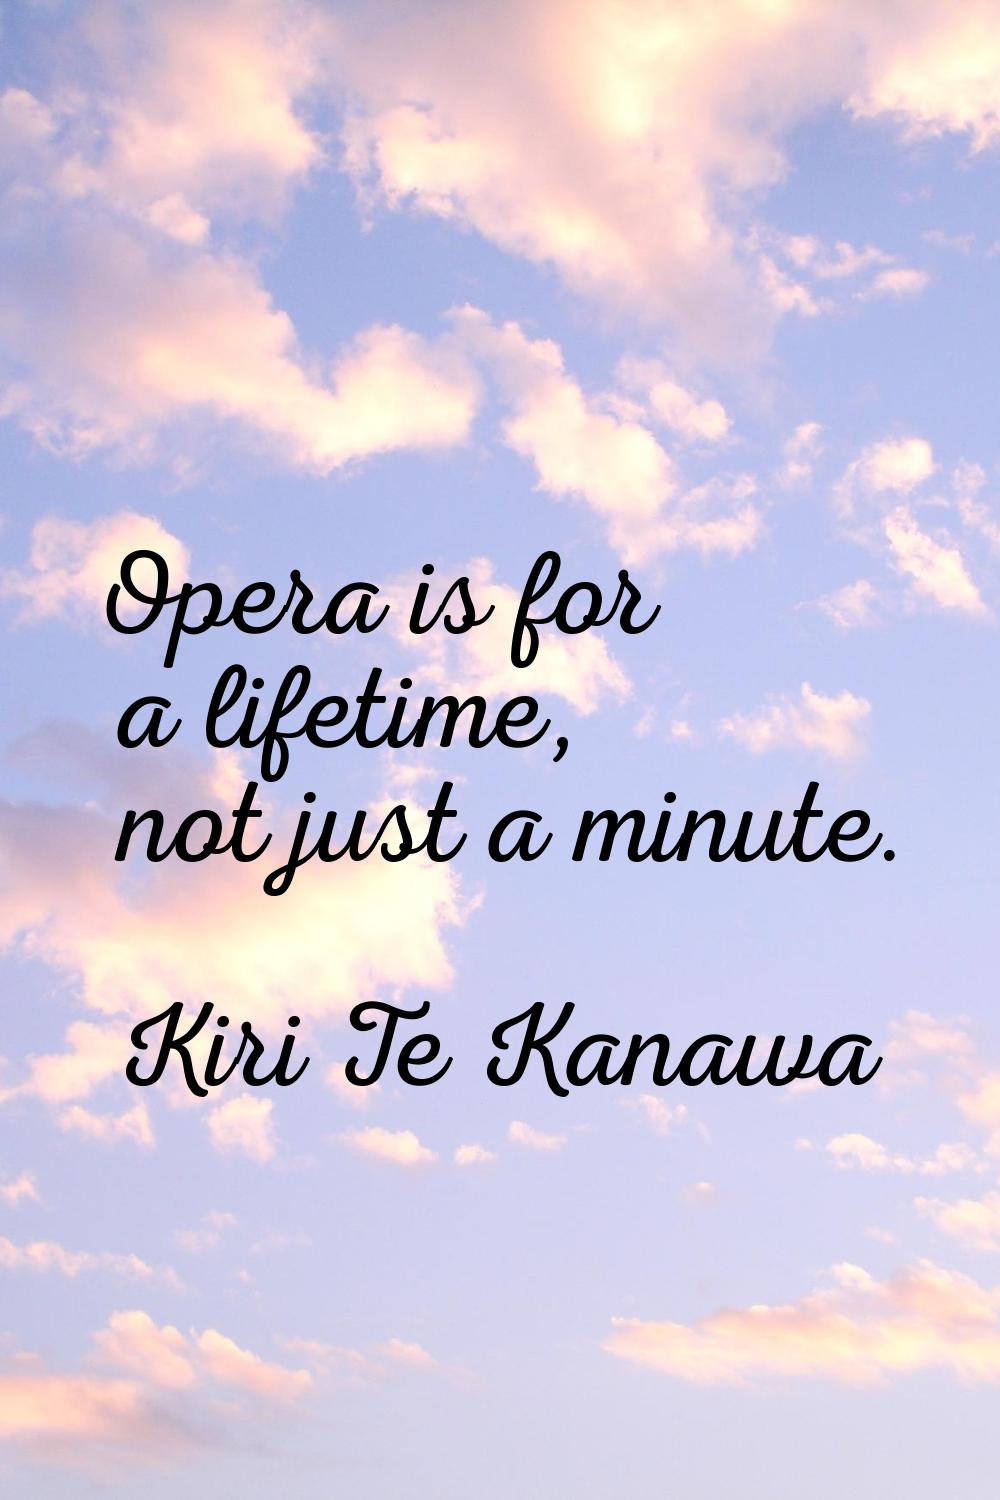 Opera is for a lifetime, not just a minute.